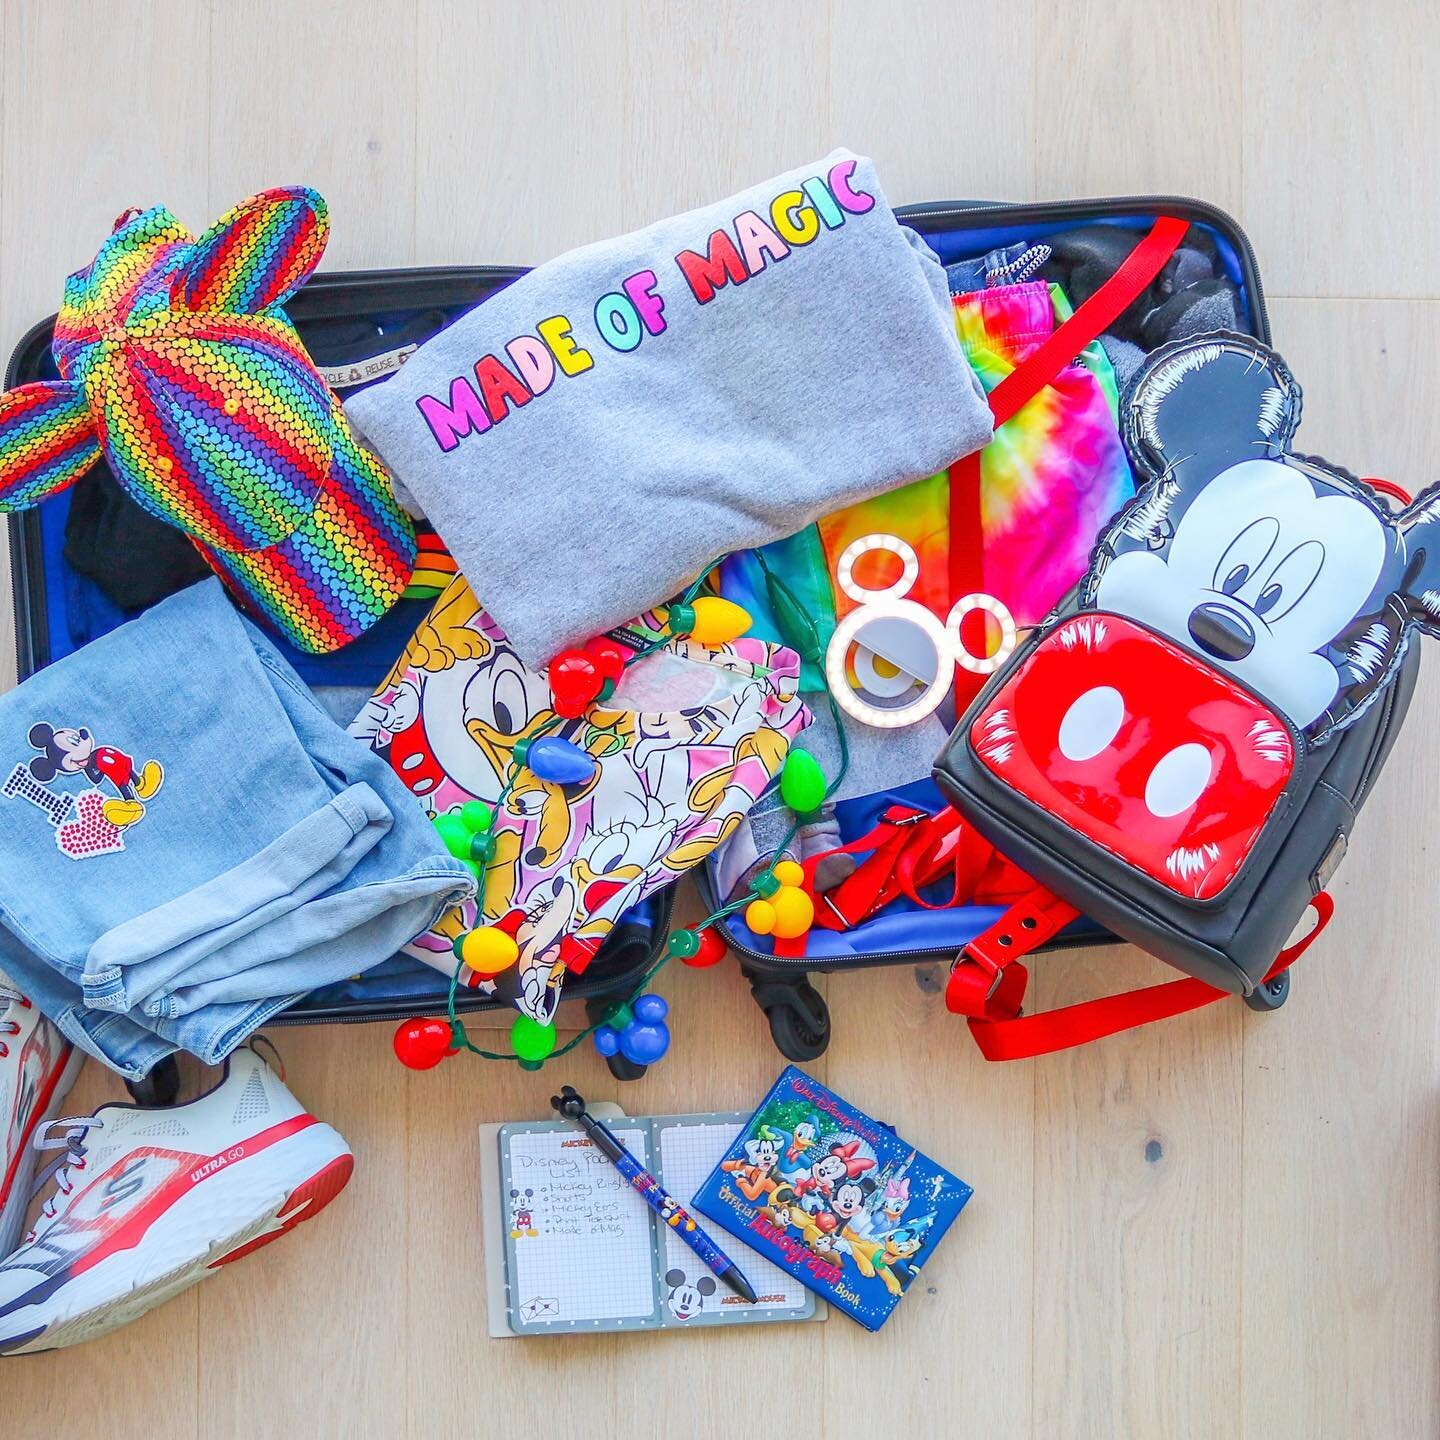 ✨Today is the day!! All prepared, pack and ready to go on a magical road-trip to the most magical place on earth @waltdisneyworld 

On the blog I&rsquo;m sharing my top 3 essentials Disney must-haves to help you pack for your next Disney trip!🧳✨

Ge